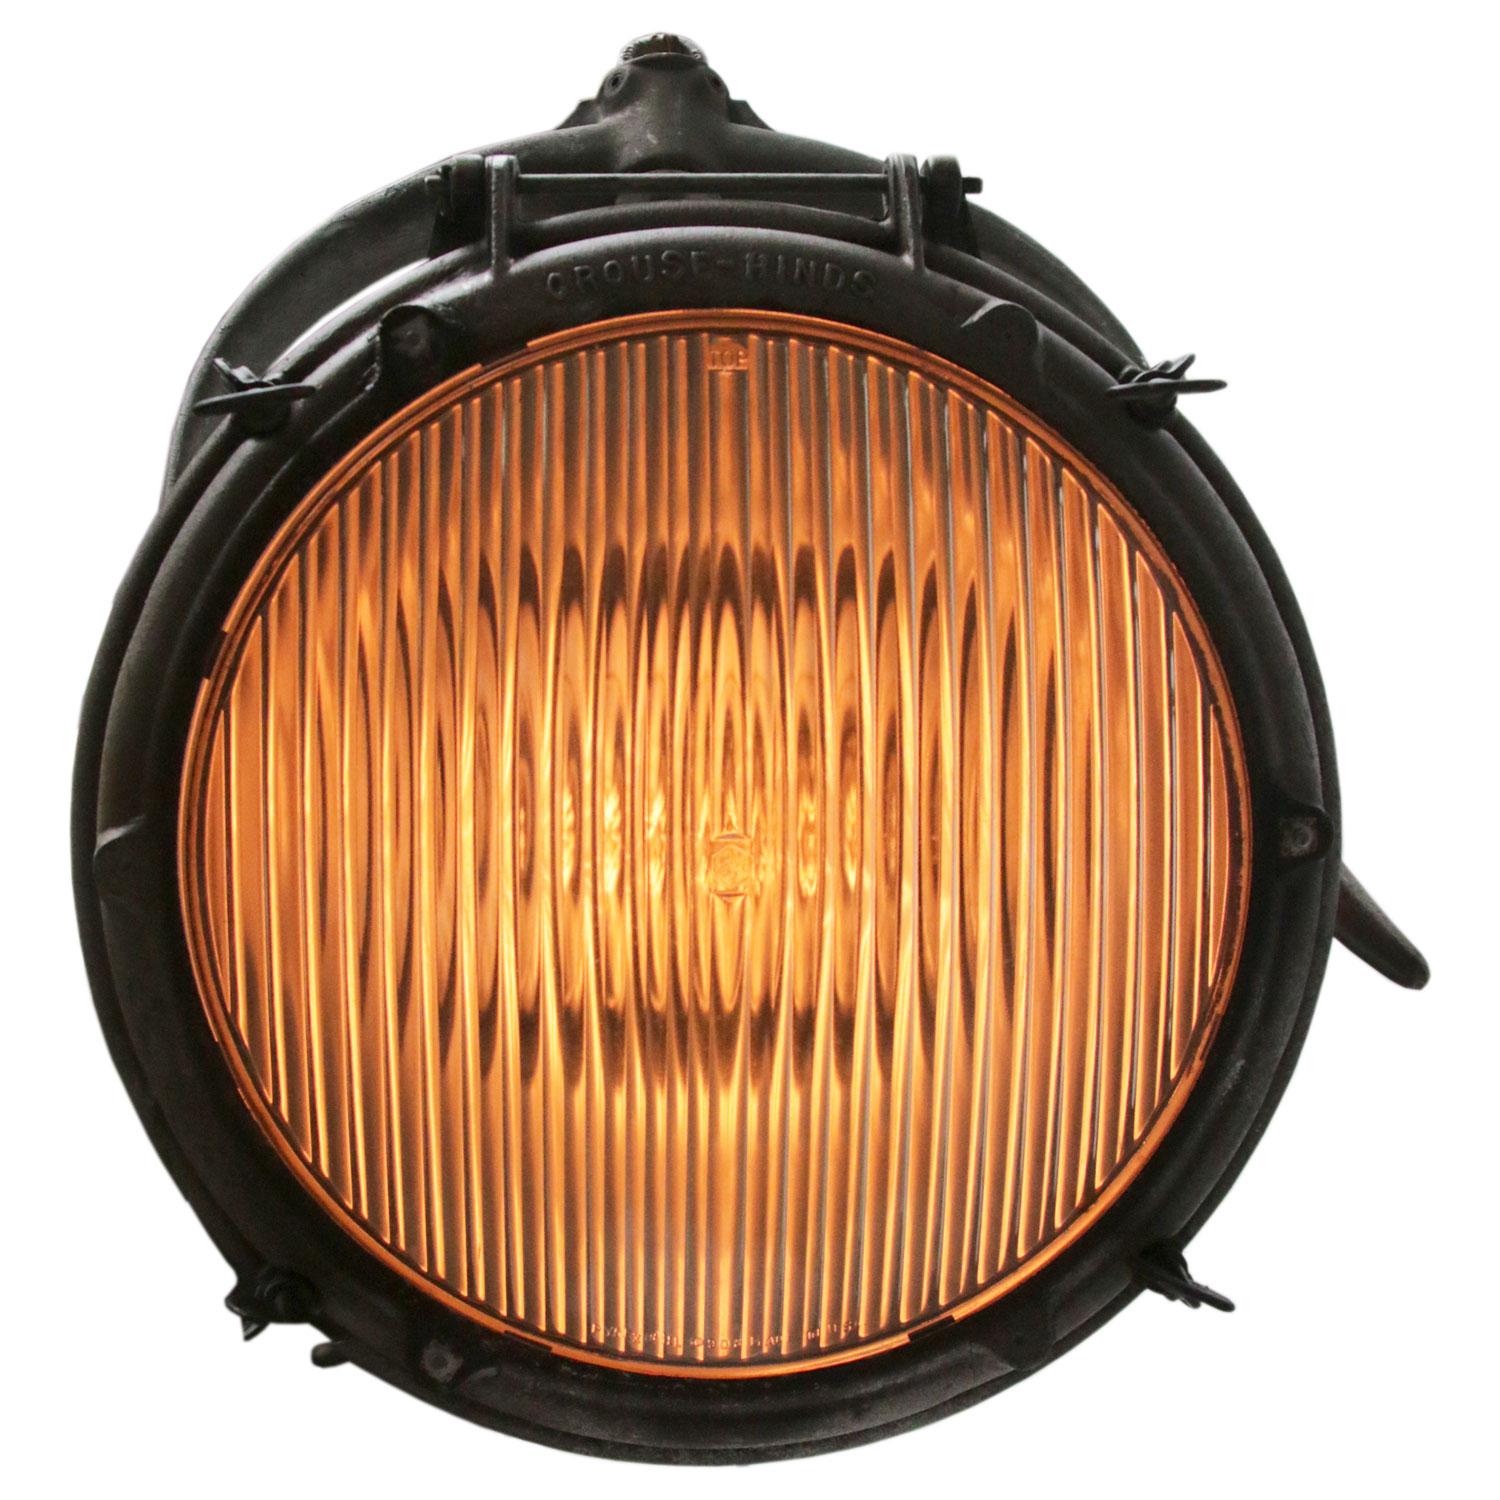 Industrial hanging light crouse-hinds spot, USA.
Cast aluminium with striped glass. Measures: Diameter 33. 5 cm.

Weight 12.5 kg / 27.6 lb

Priced per individual item. All lamps have been made suitable by international standards for incandescent